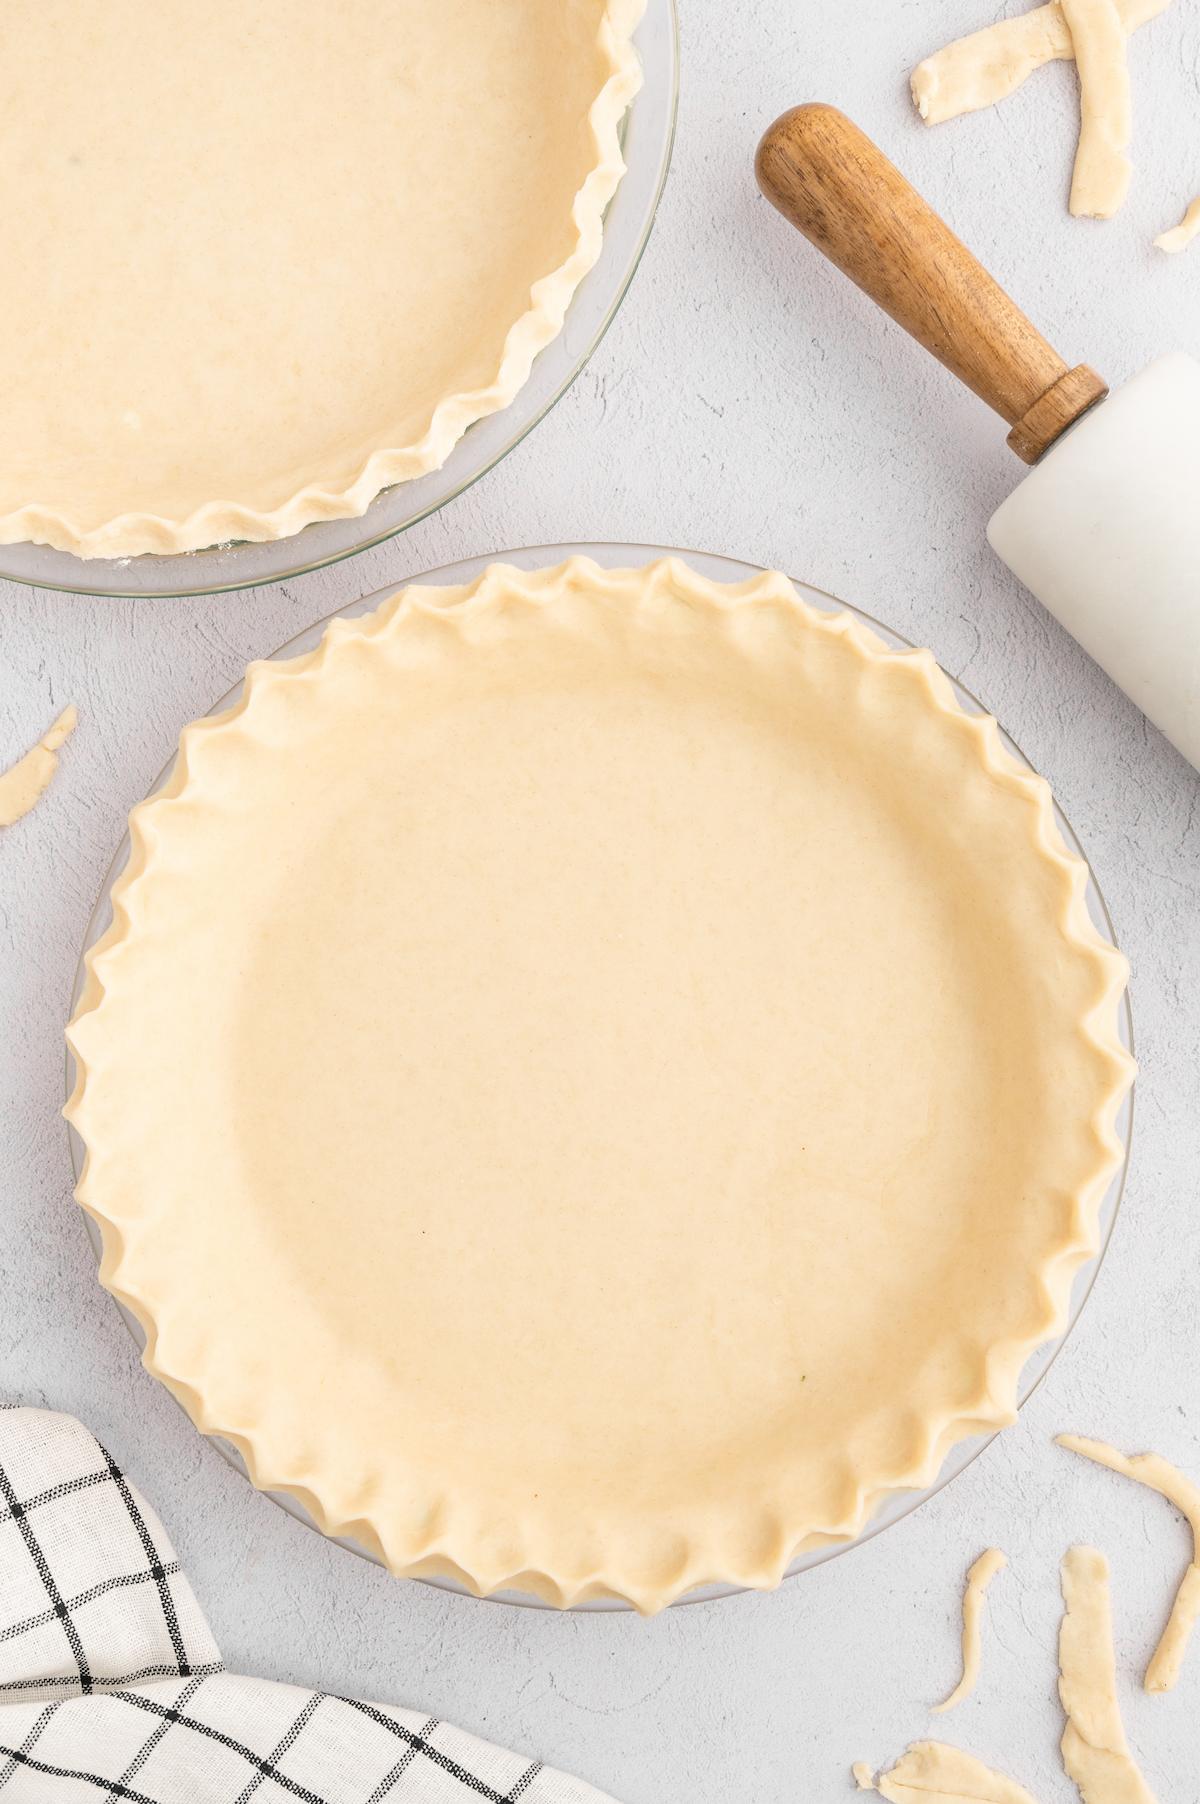 Two vegan pie crusts in pie pans next to a rolling pin.